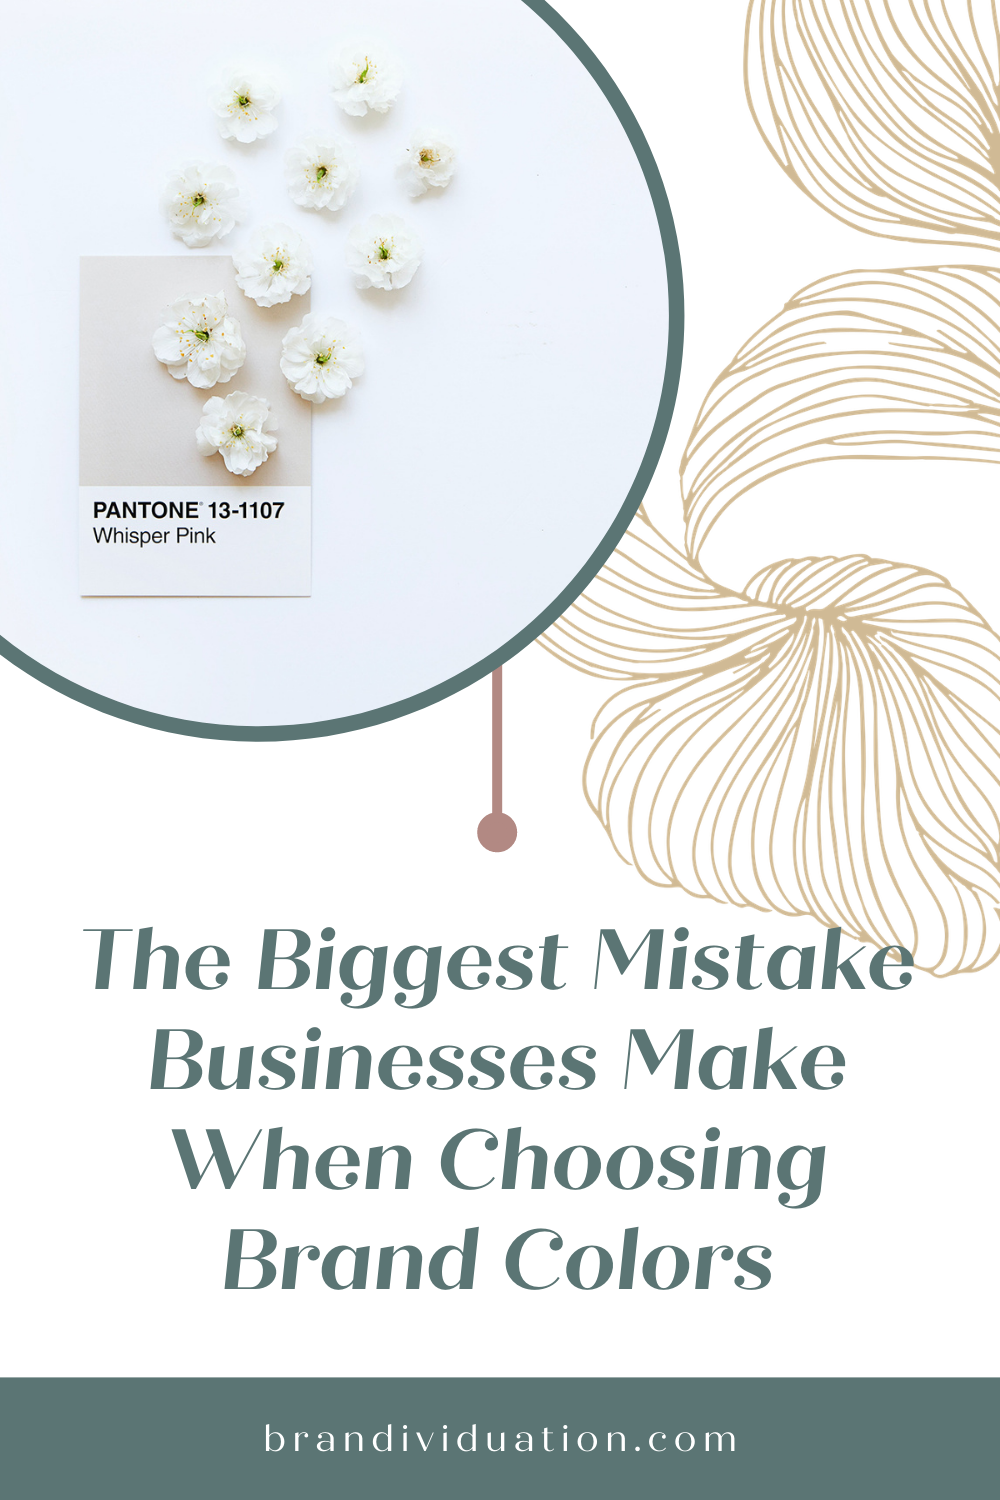 The Biggest Mistake Businesses Make When Choosing Brand Colors